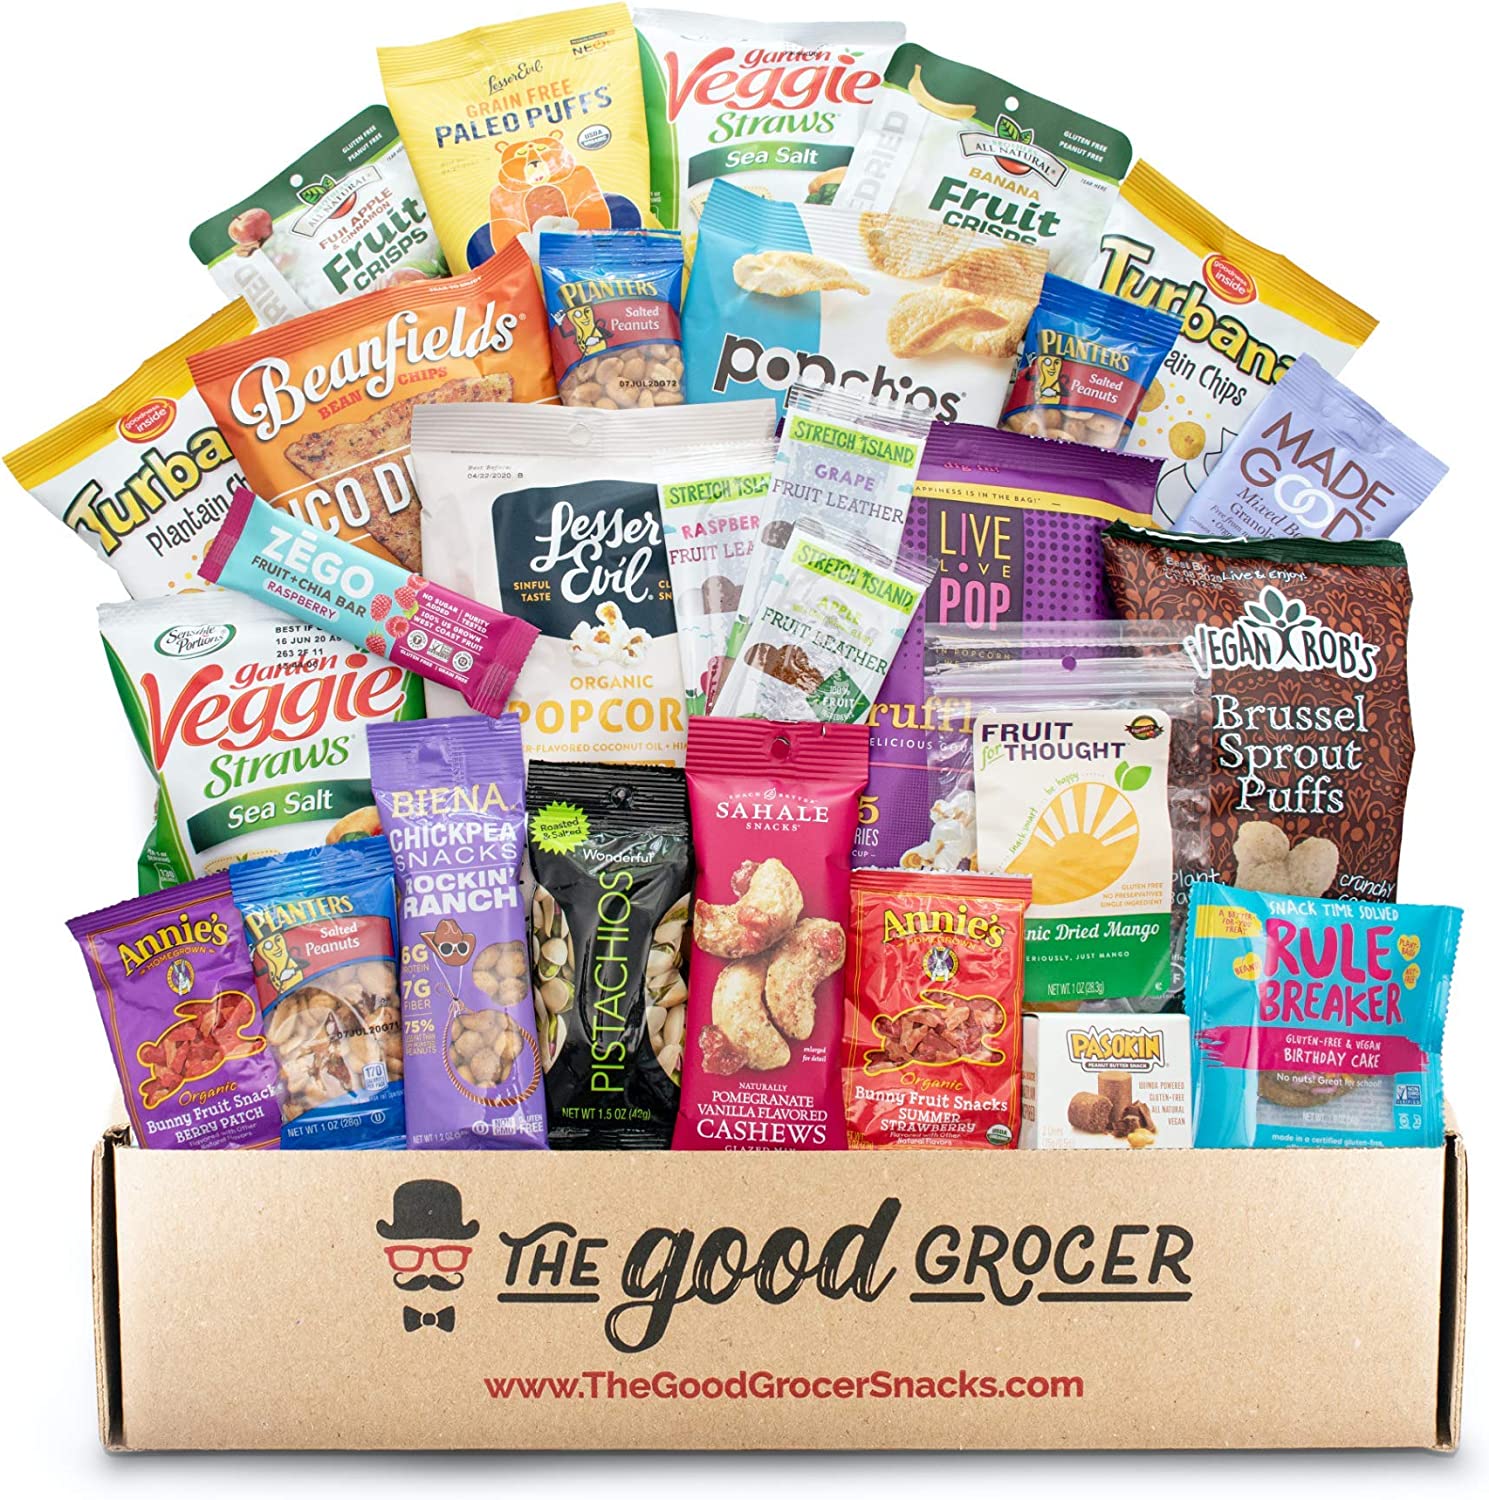 GLUTEN FREE and VEGAN (DAIRY and FIG FREE) Healthy Snacks Care Package (28 Ct): Cookies, Bars, Chips, Fruit, Nuts, Trail Mix, Gift Box Sampler, Office Variety, College Student Care Package, Gift Basket Alternative